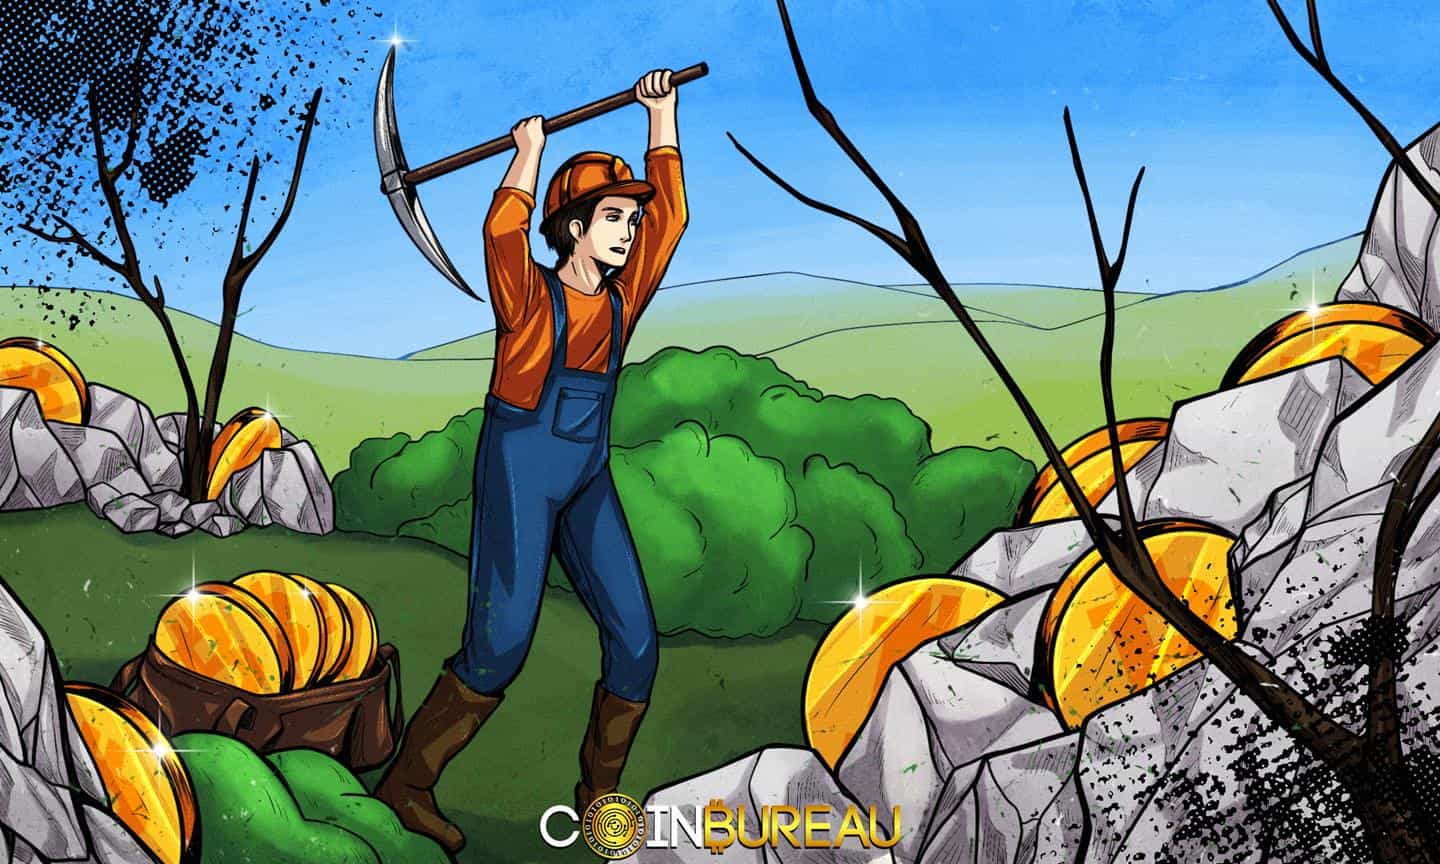 Is Bitcoin Mining REALLY Bad for the Environment